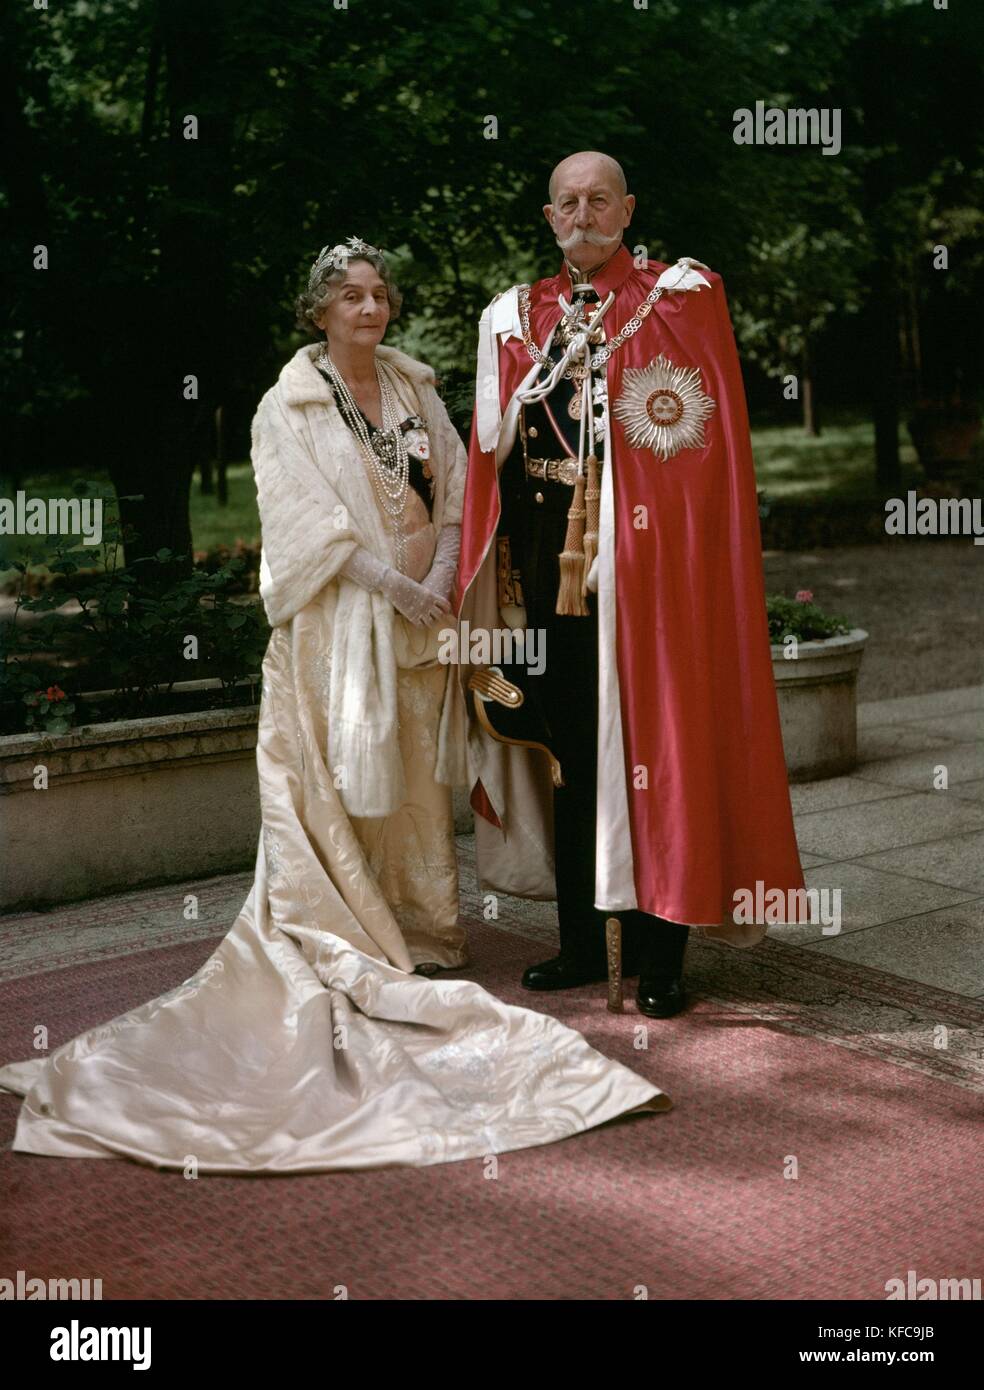 Prince George of Greece and of Denmark (1869-1957) and his wife Princess Marie Bonapart (1882-1962) in court dress  1953  Taponier Photo Photo12.com - Coll. Taponier Stock Photo